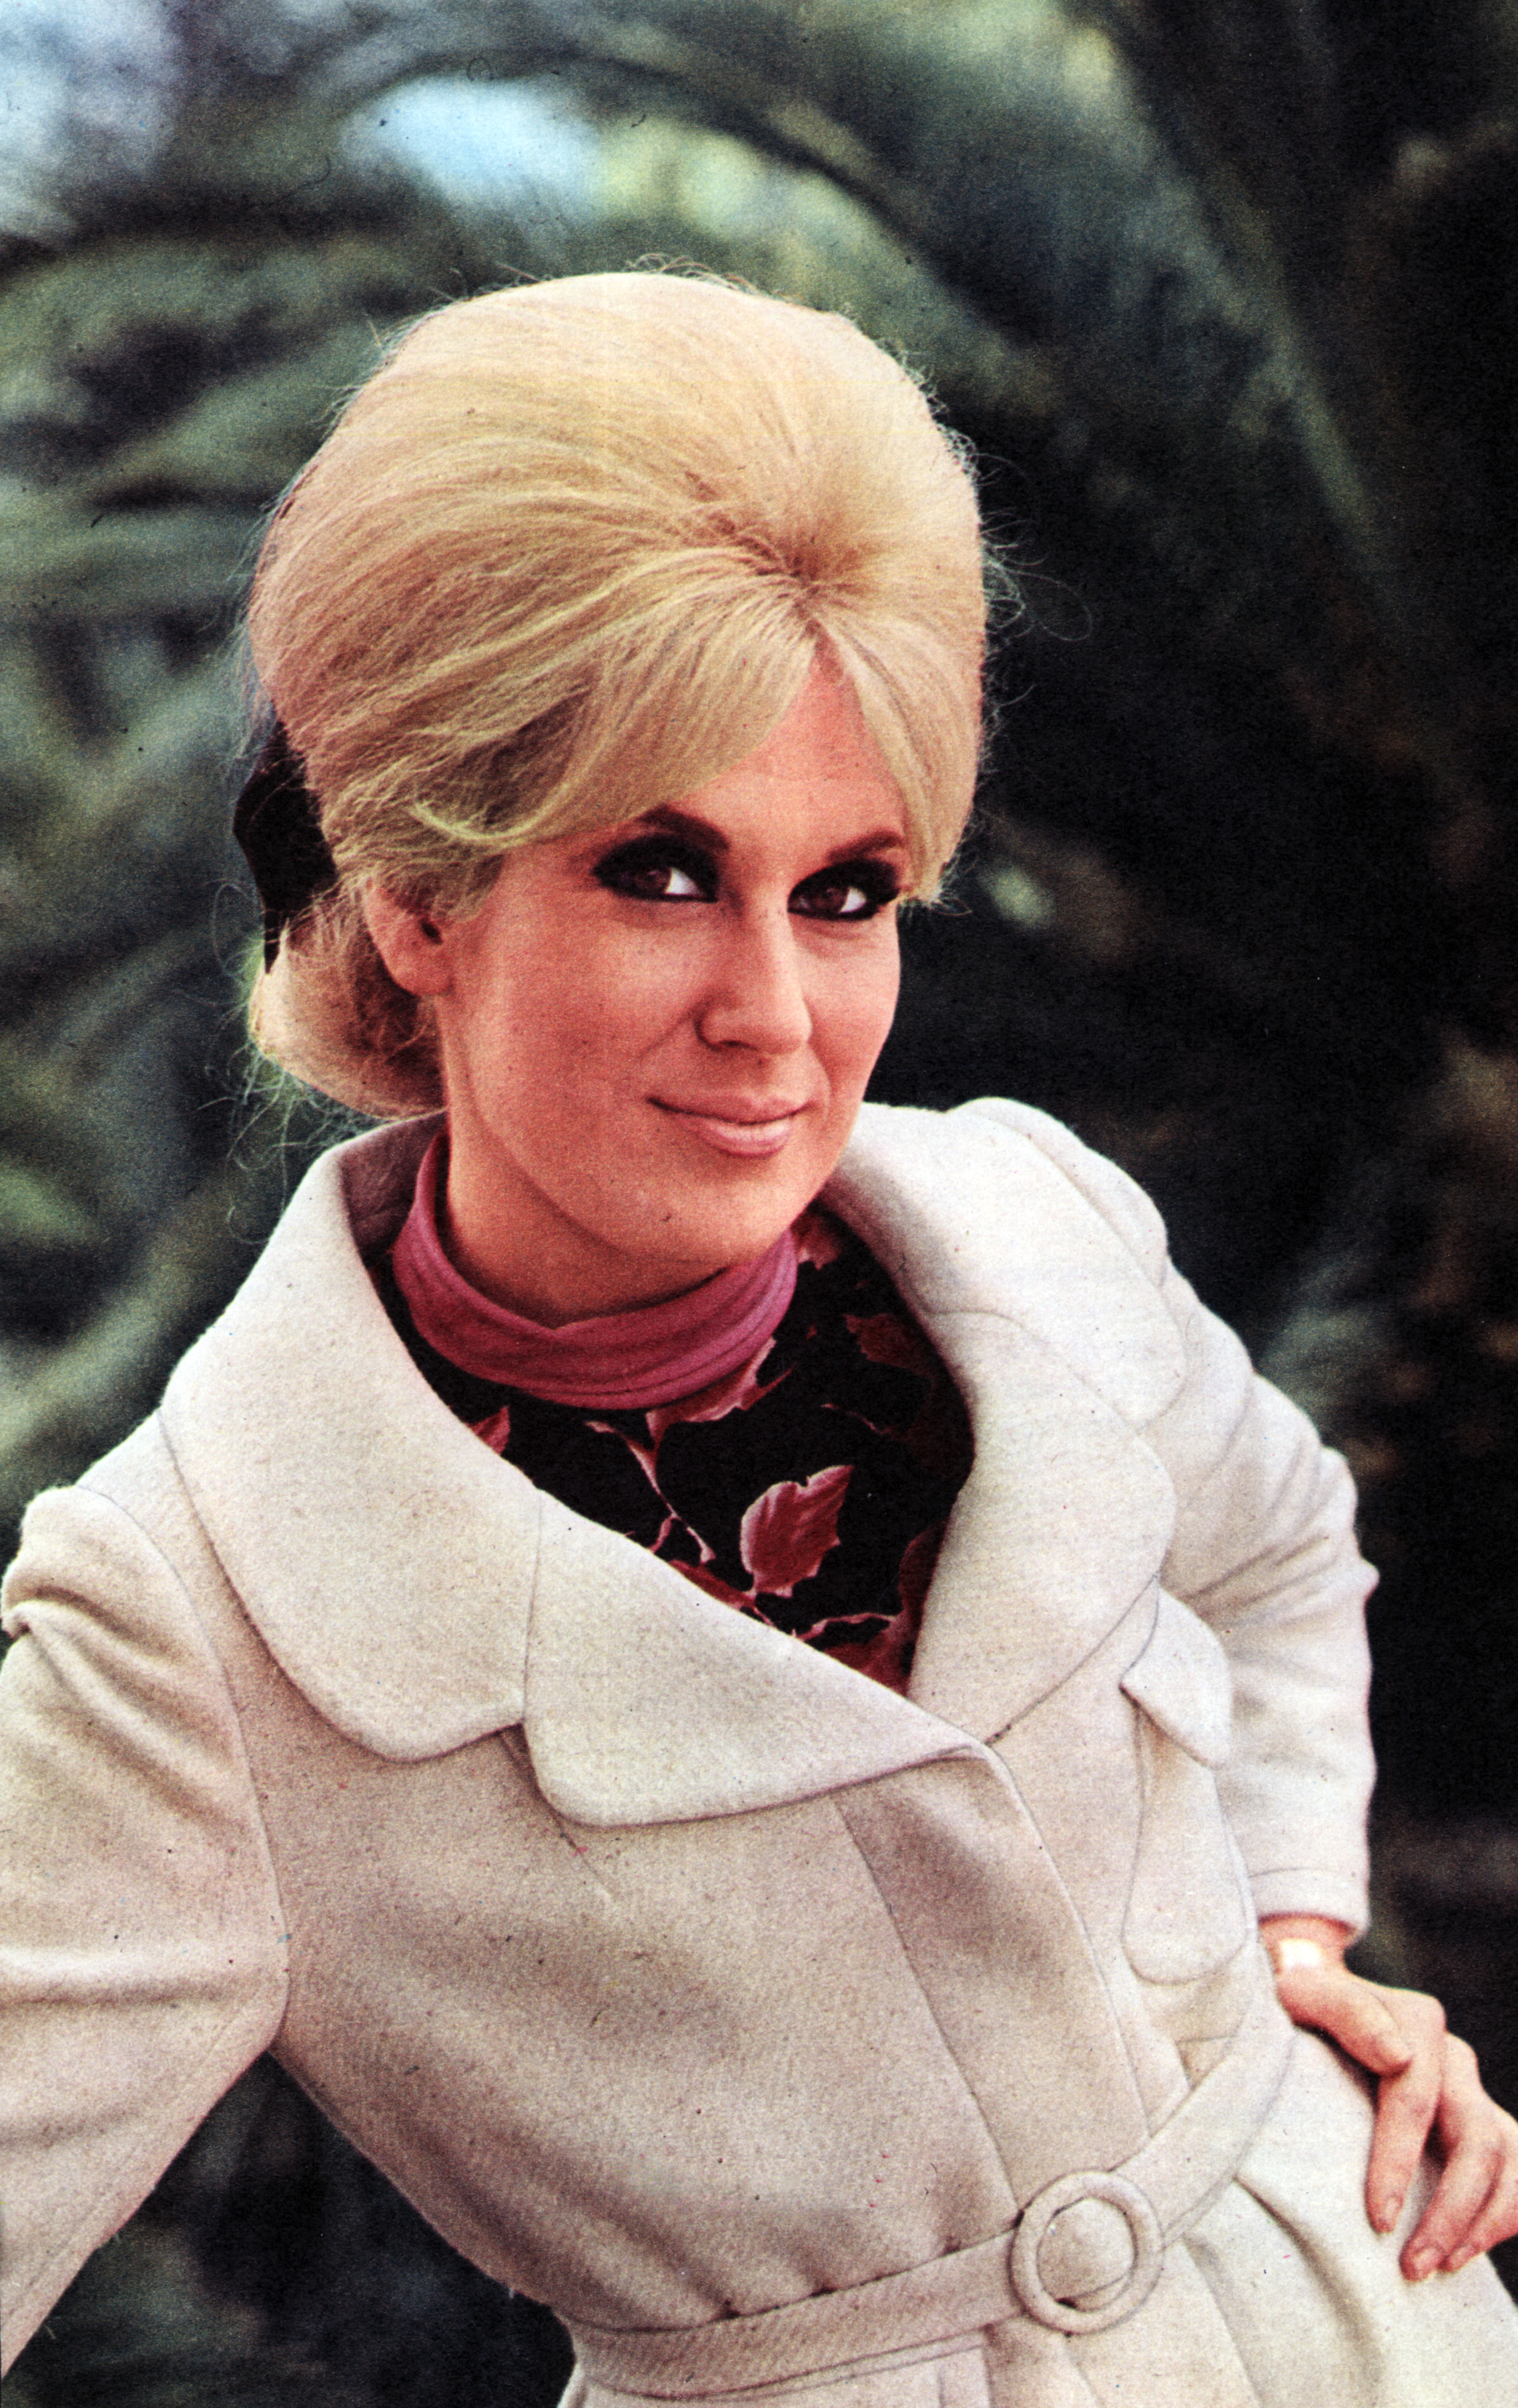 A portrait of Dusty Springfield from 1965. | Source: Getty Images